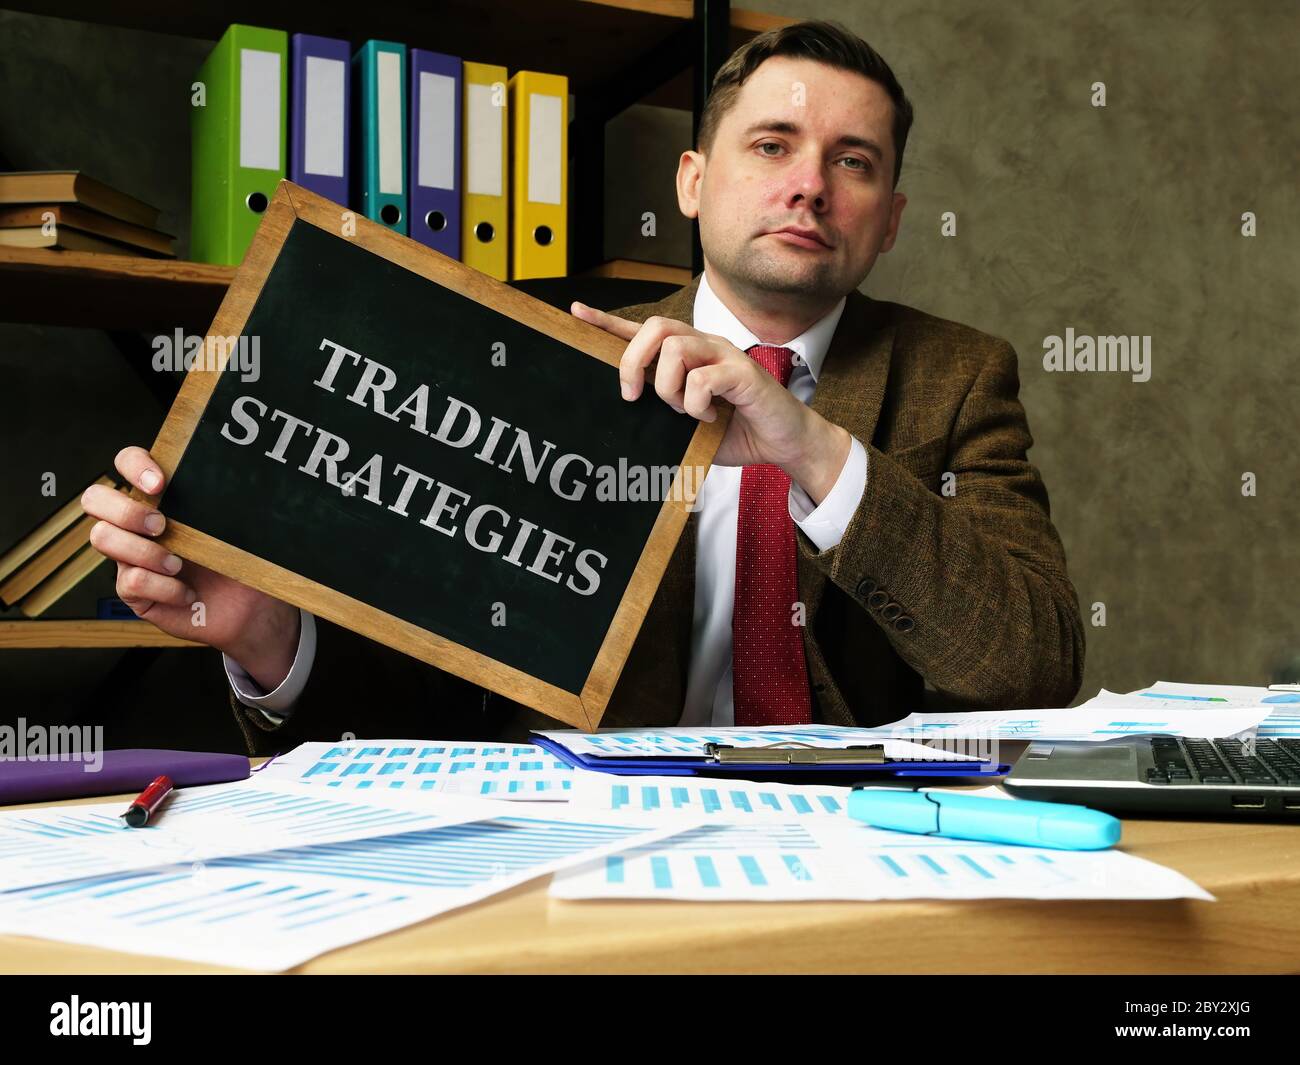 Trader holds plate with inscription Trading Strategies. Stock Photo